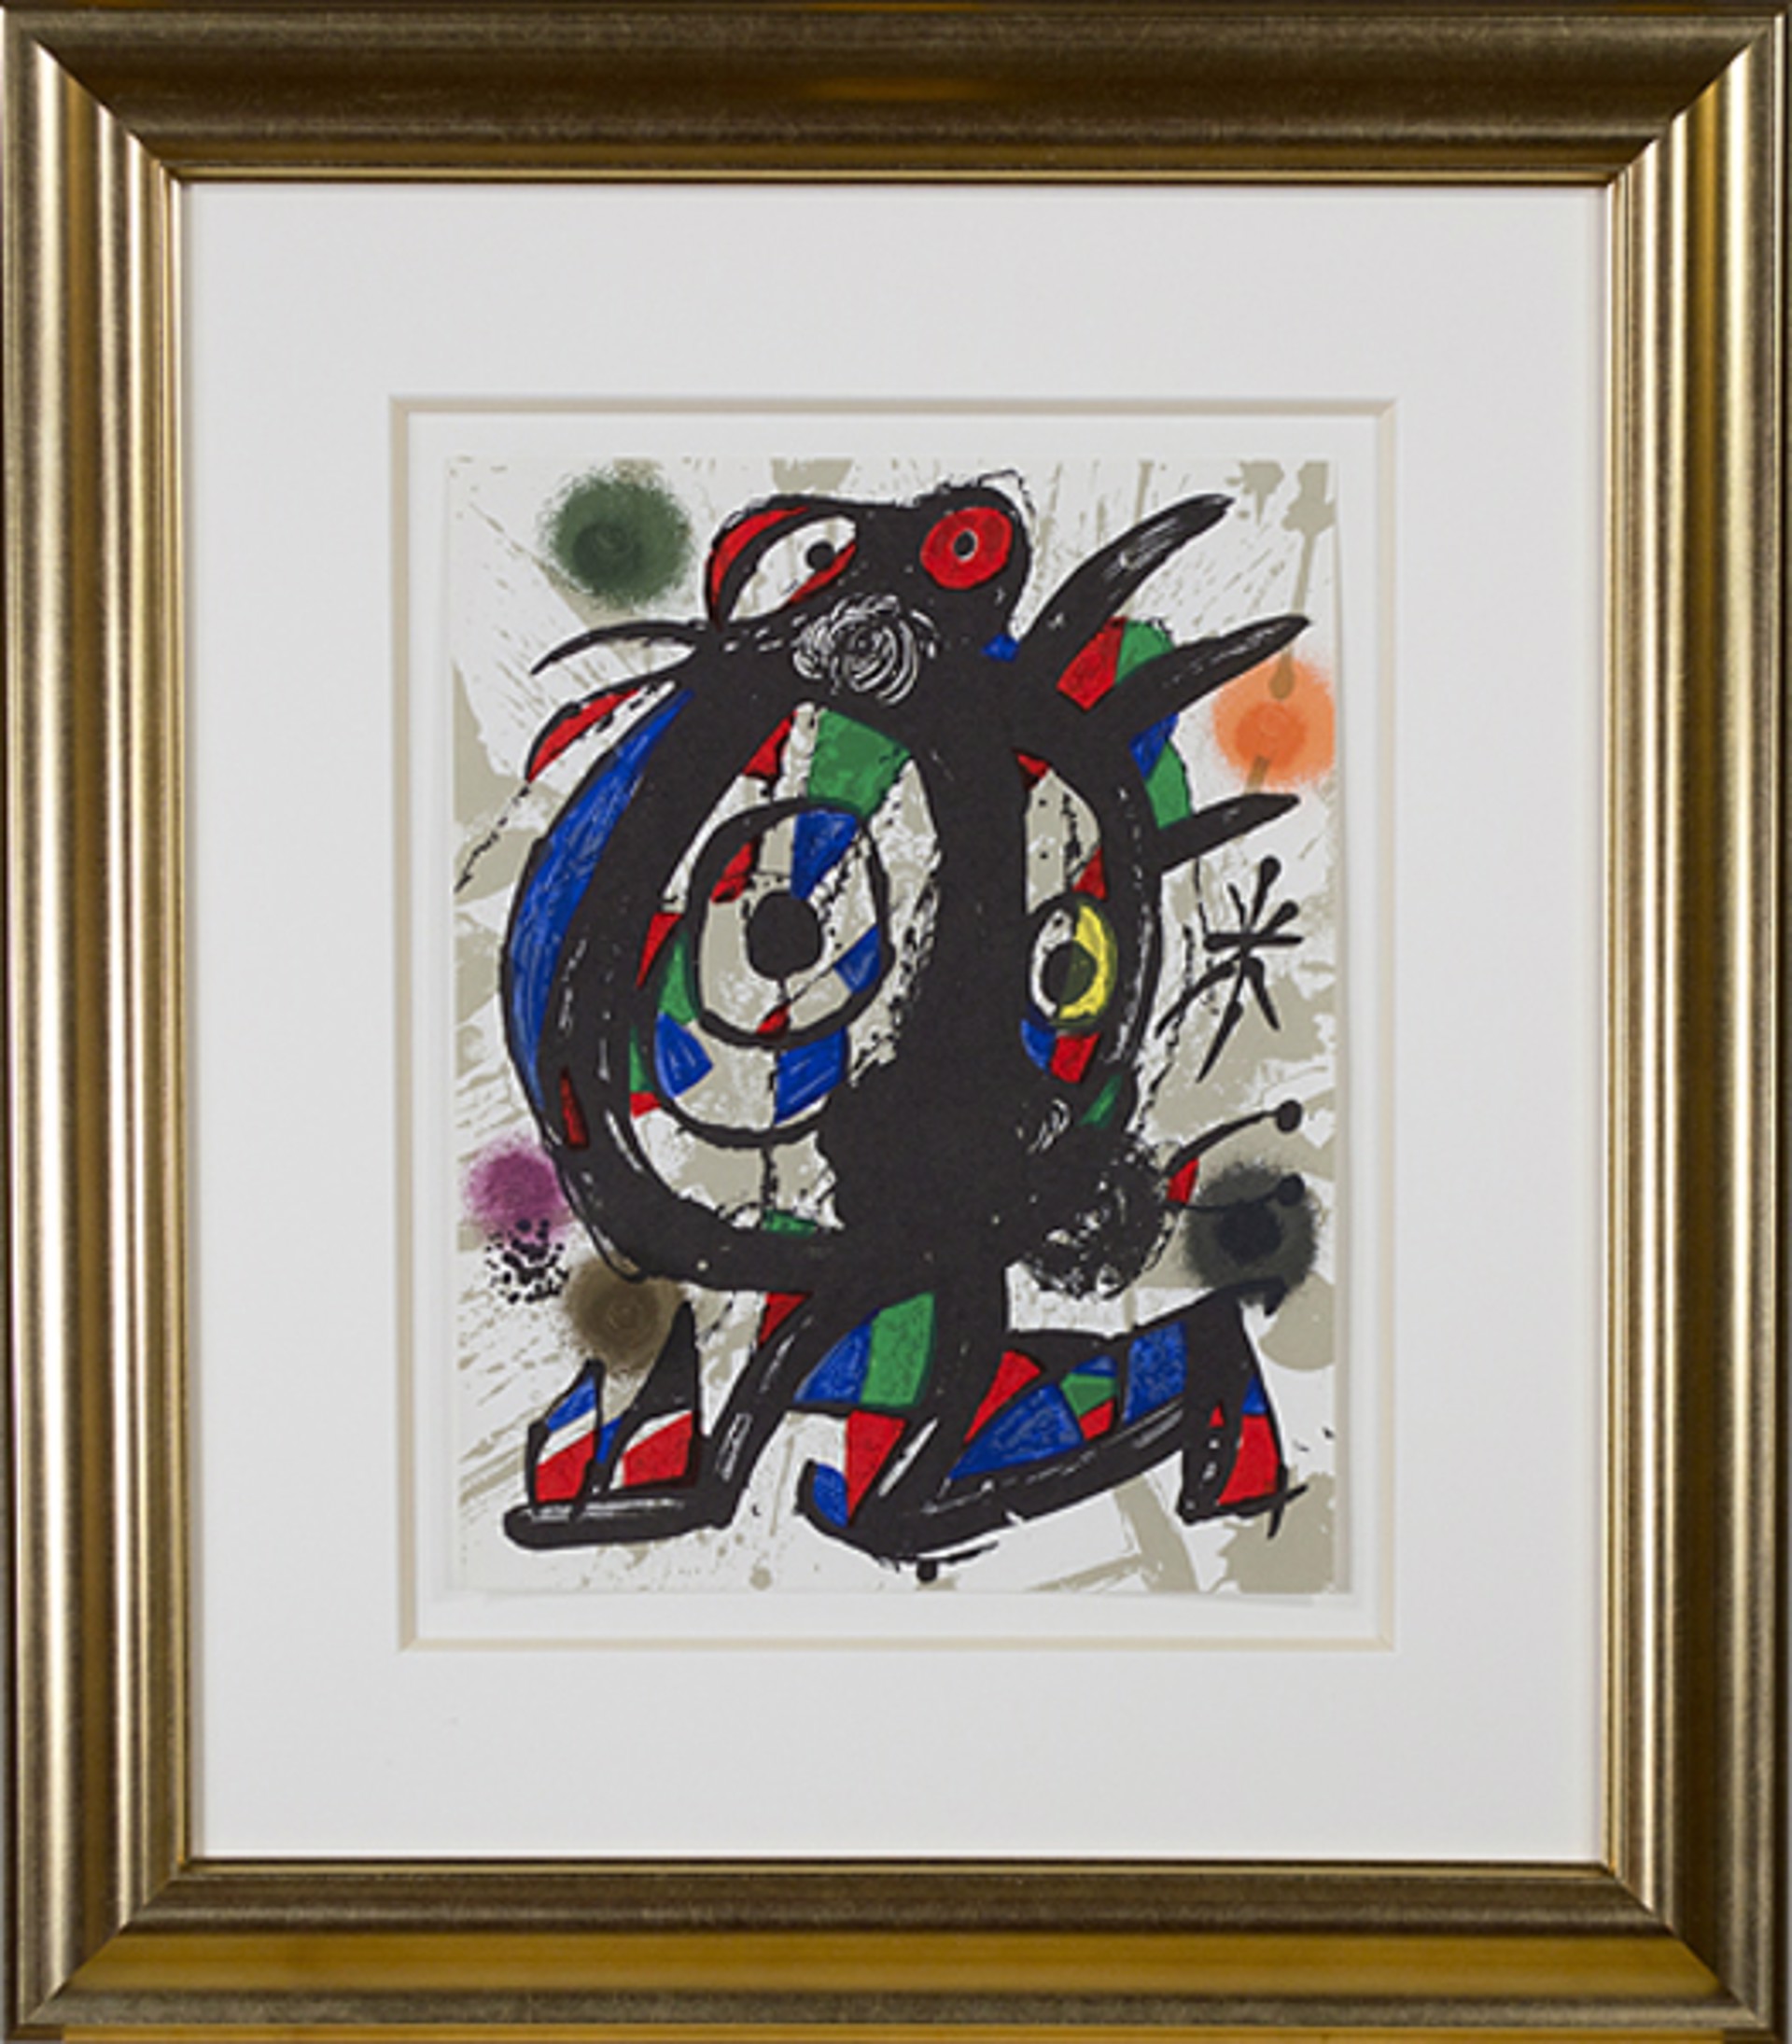 Original Lithograph I from "Miro Lithographs III, Maeght Publisher" by Joan Miró